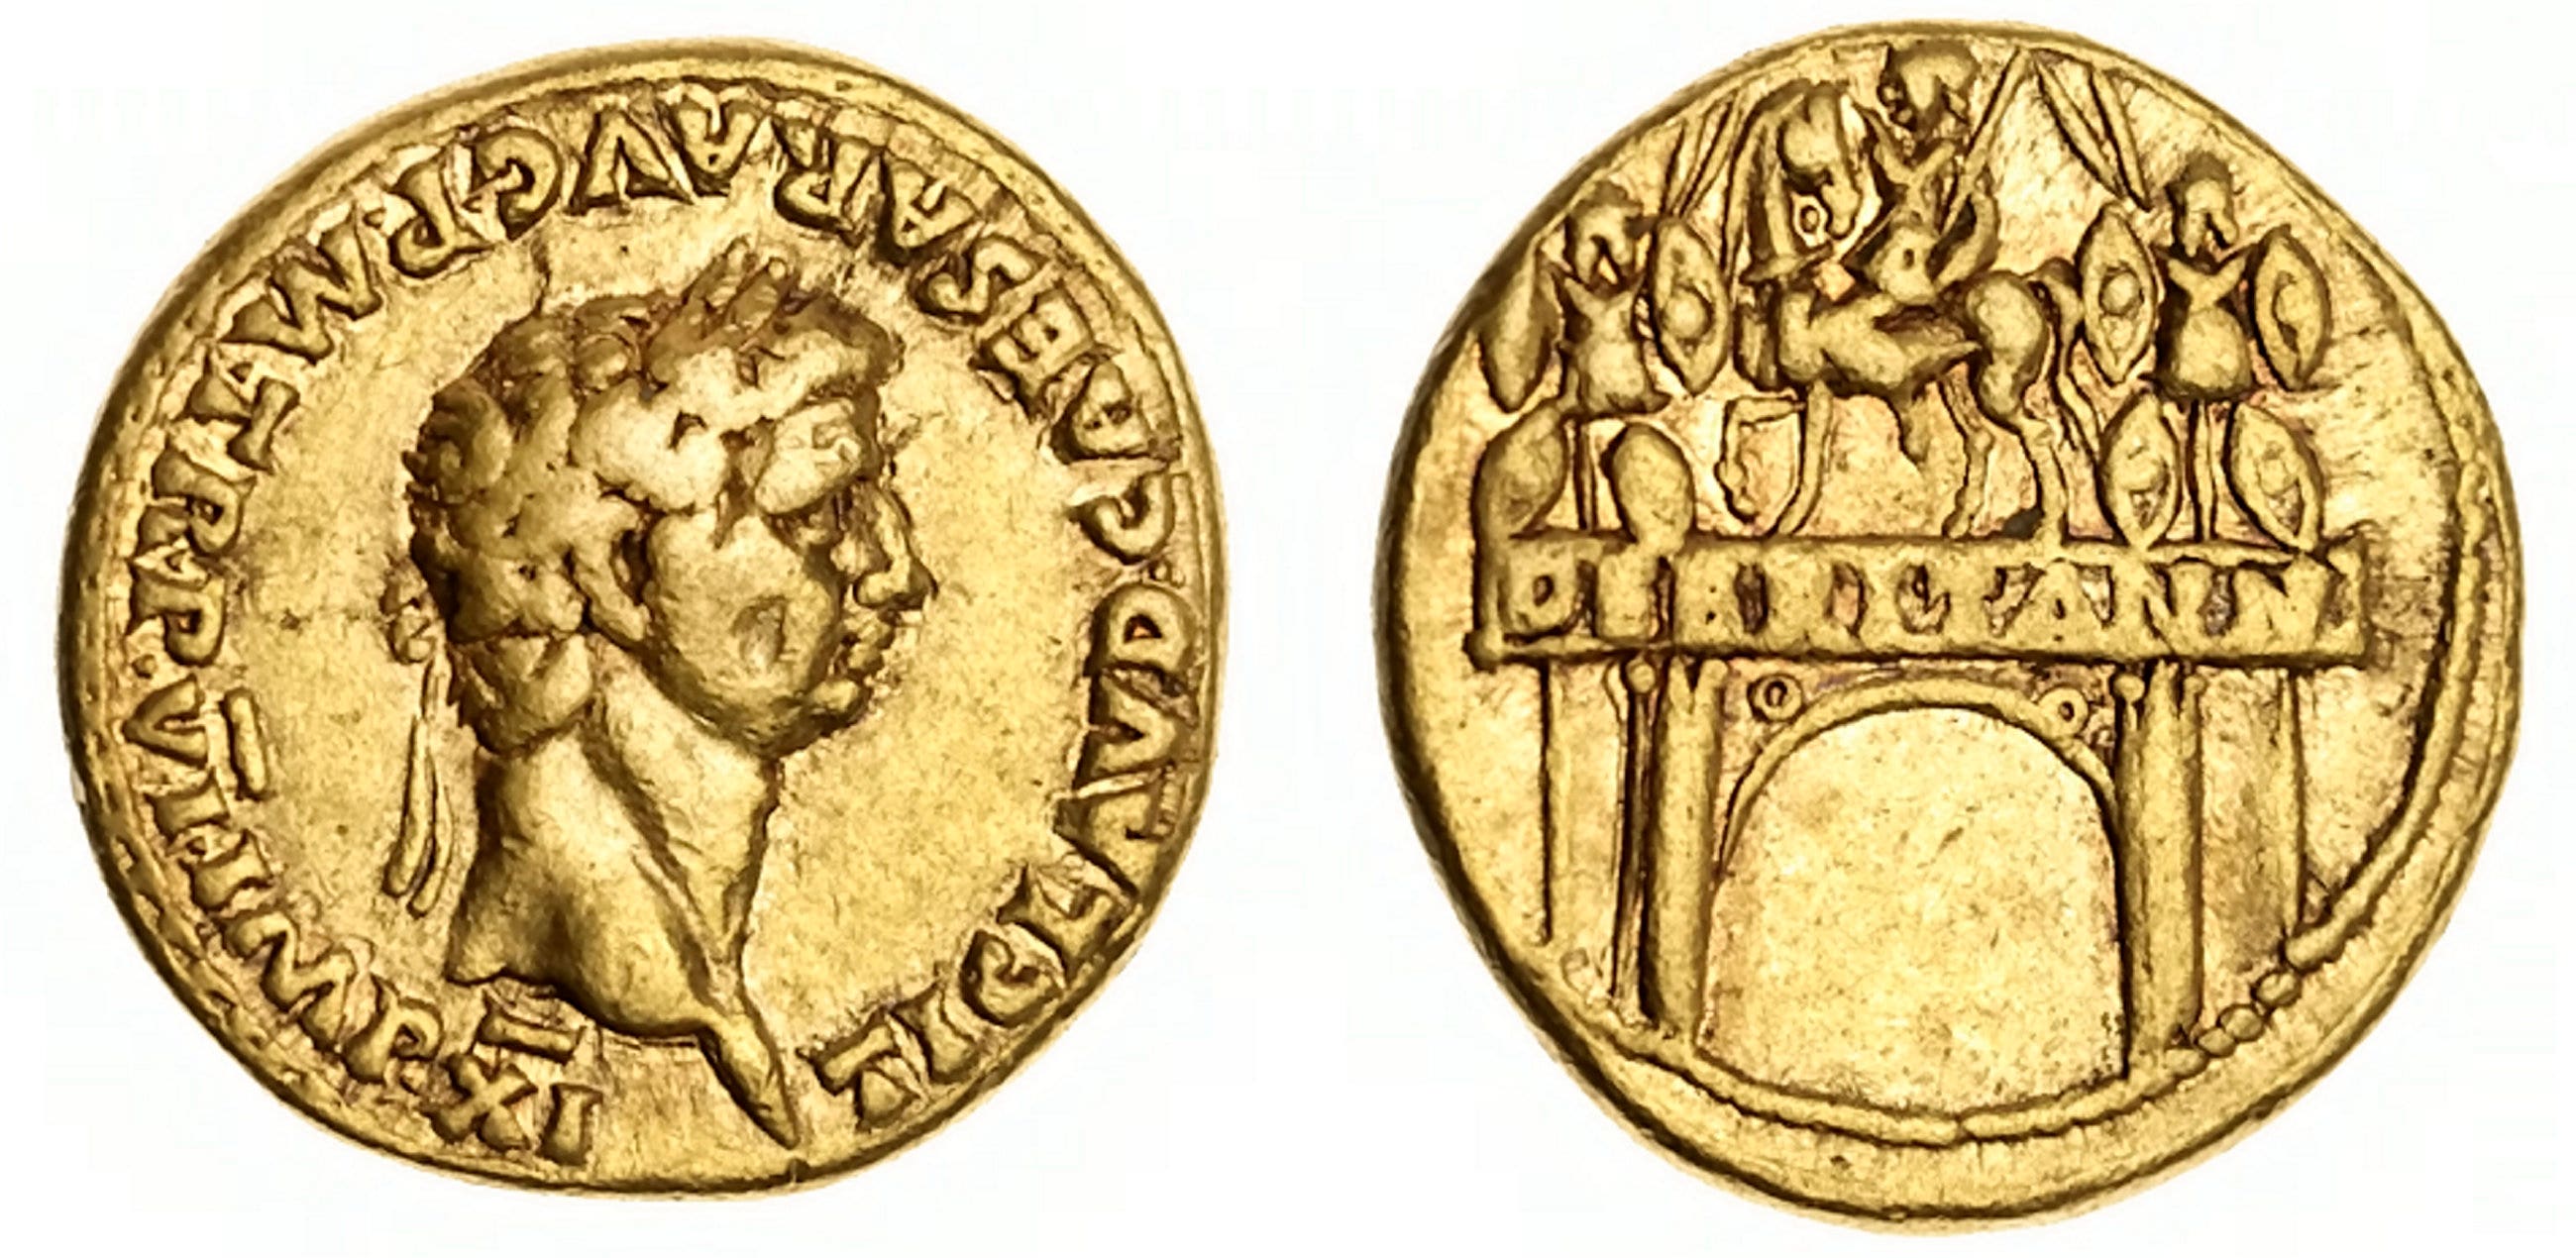 Gold Roman coin found near Pompeii fetches eye-opening amount at auction